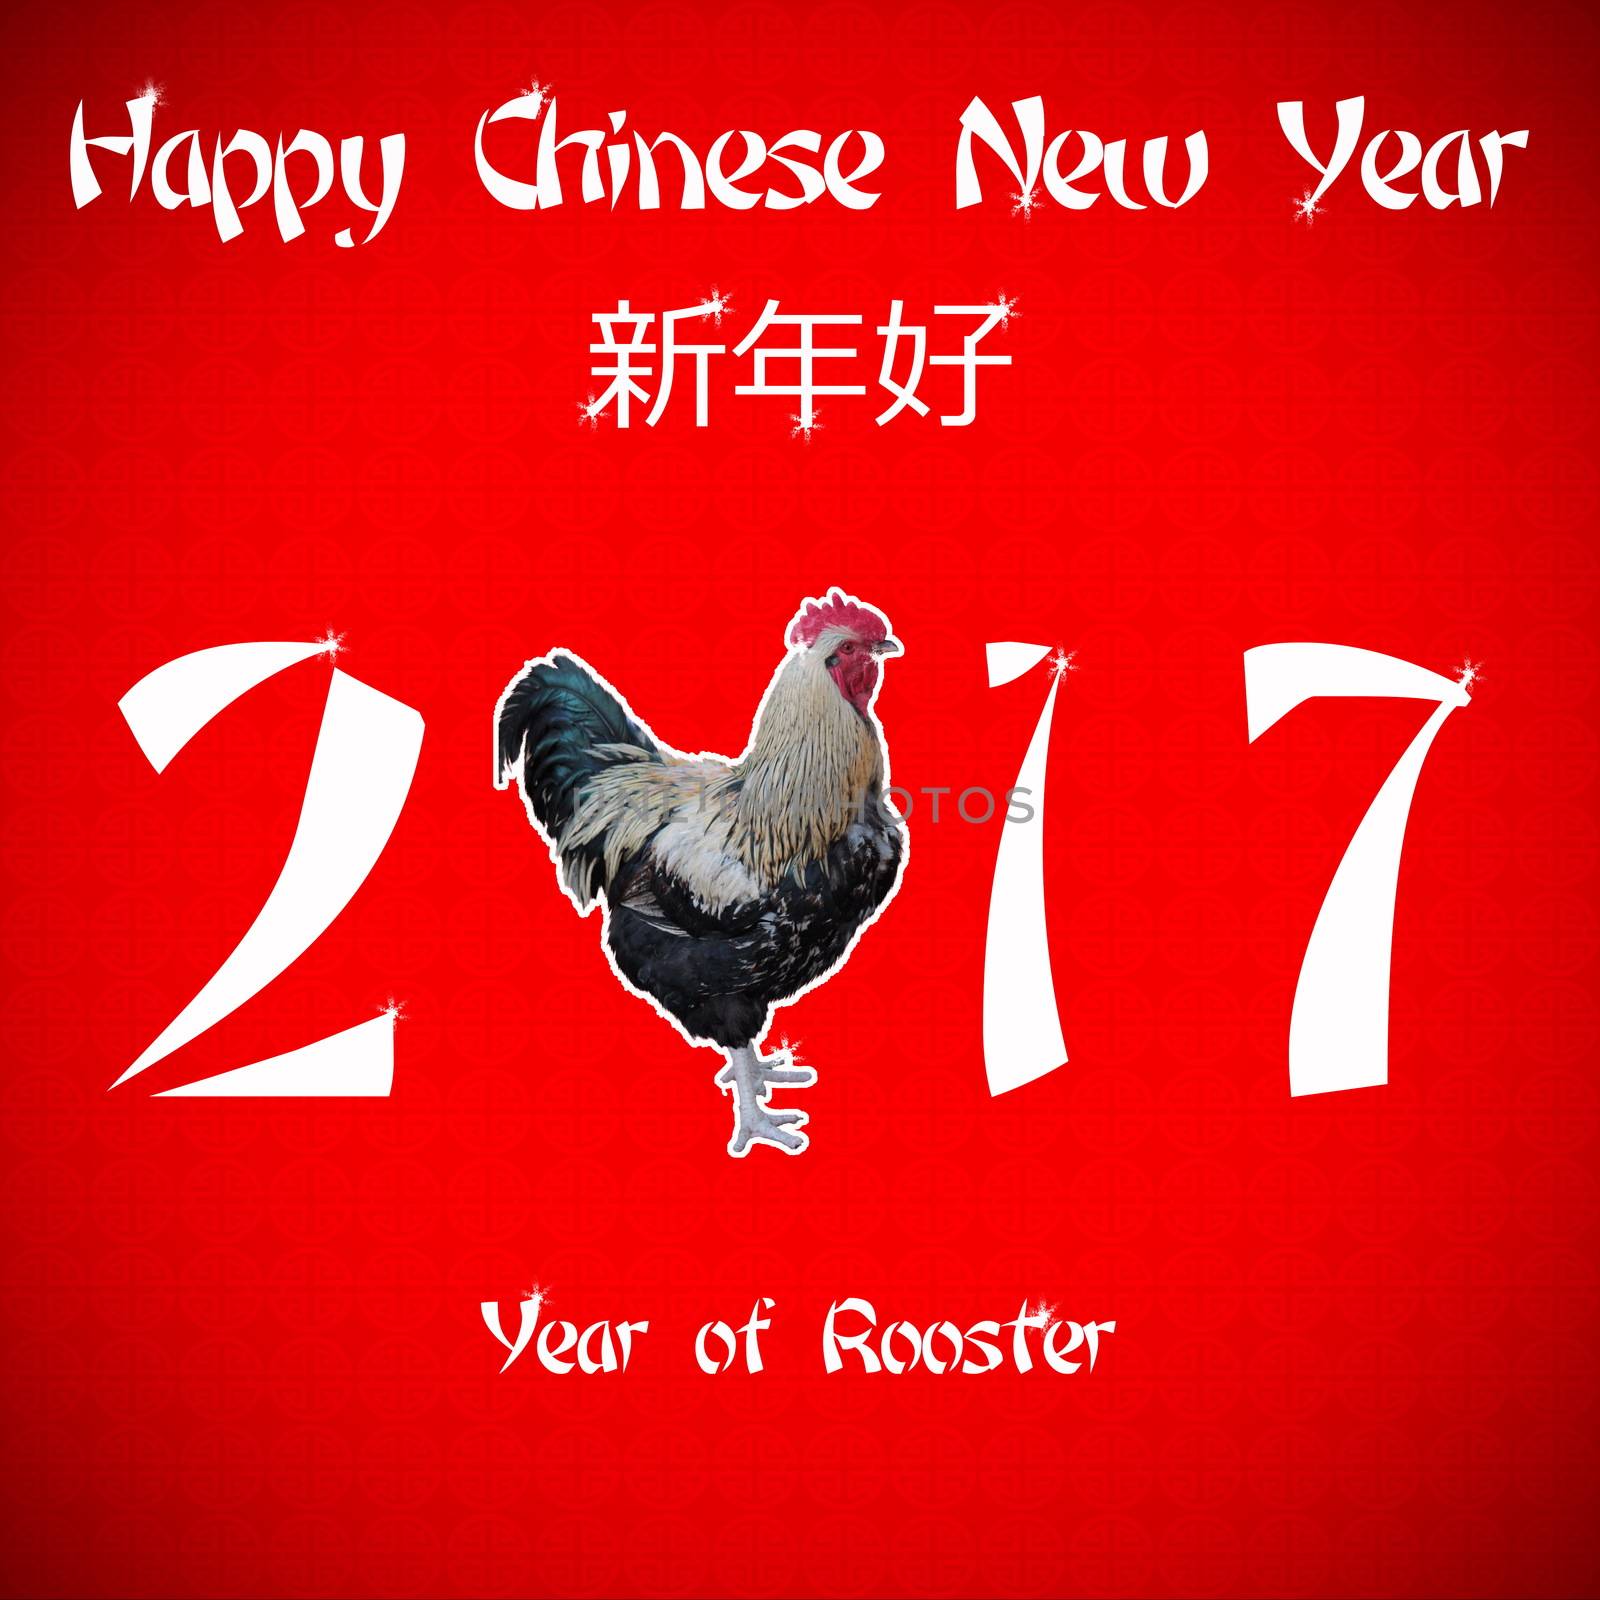 Happy rooster chinese 2017 New Year by Elenaphotos21